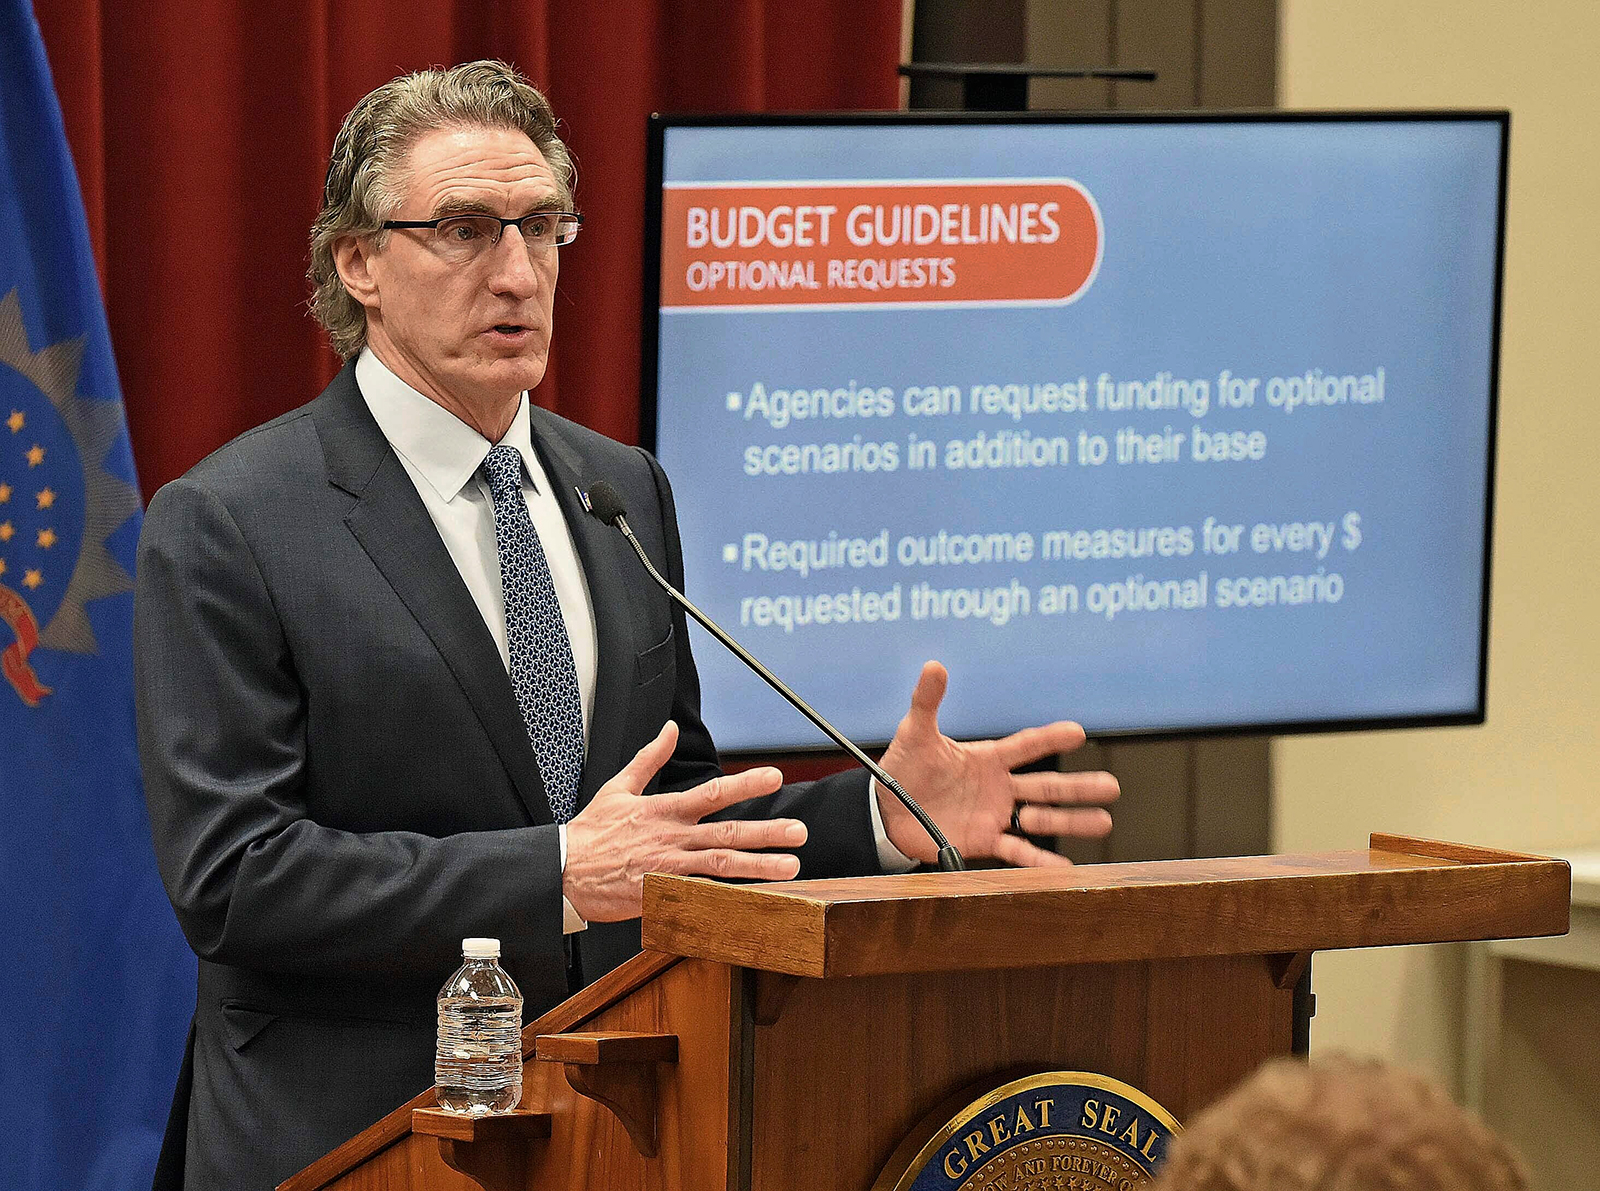 Gov. Doug Burgum issues budget guidelines to North Dakota state agencies for the 2021-23 biennium at a press briefing on Friday morning, May 1, in Bismarck, North Dakota.